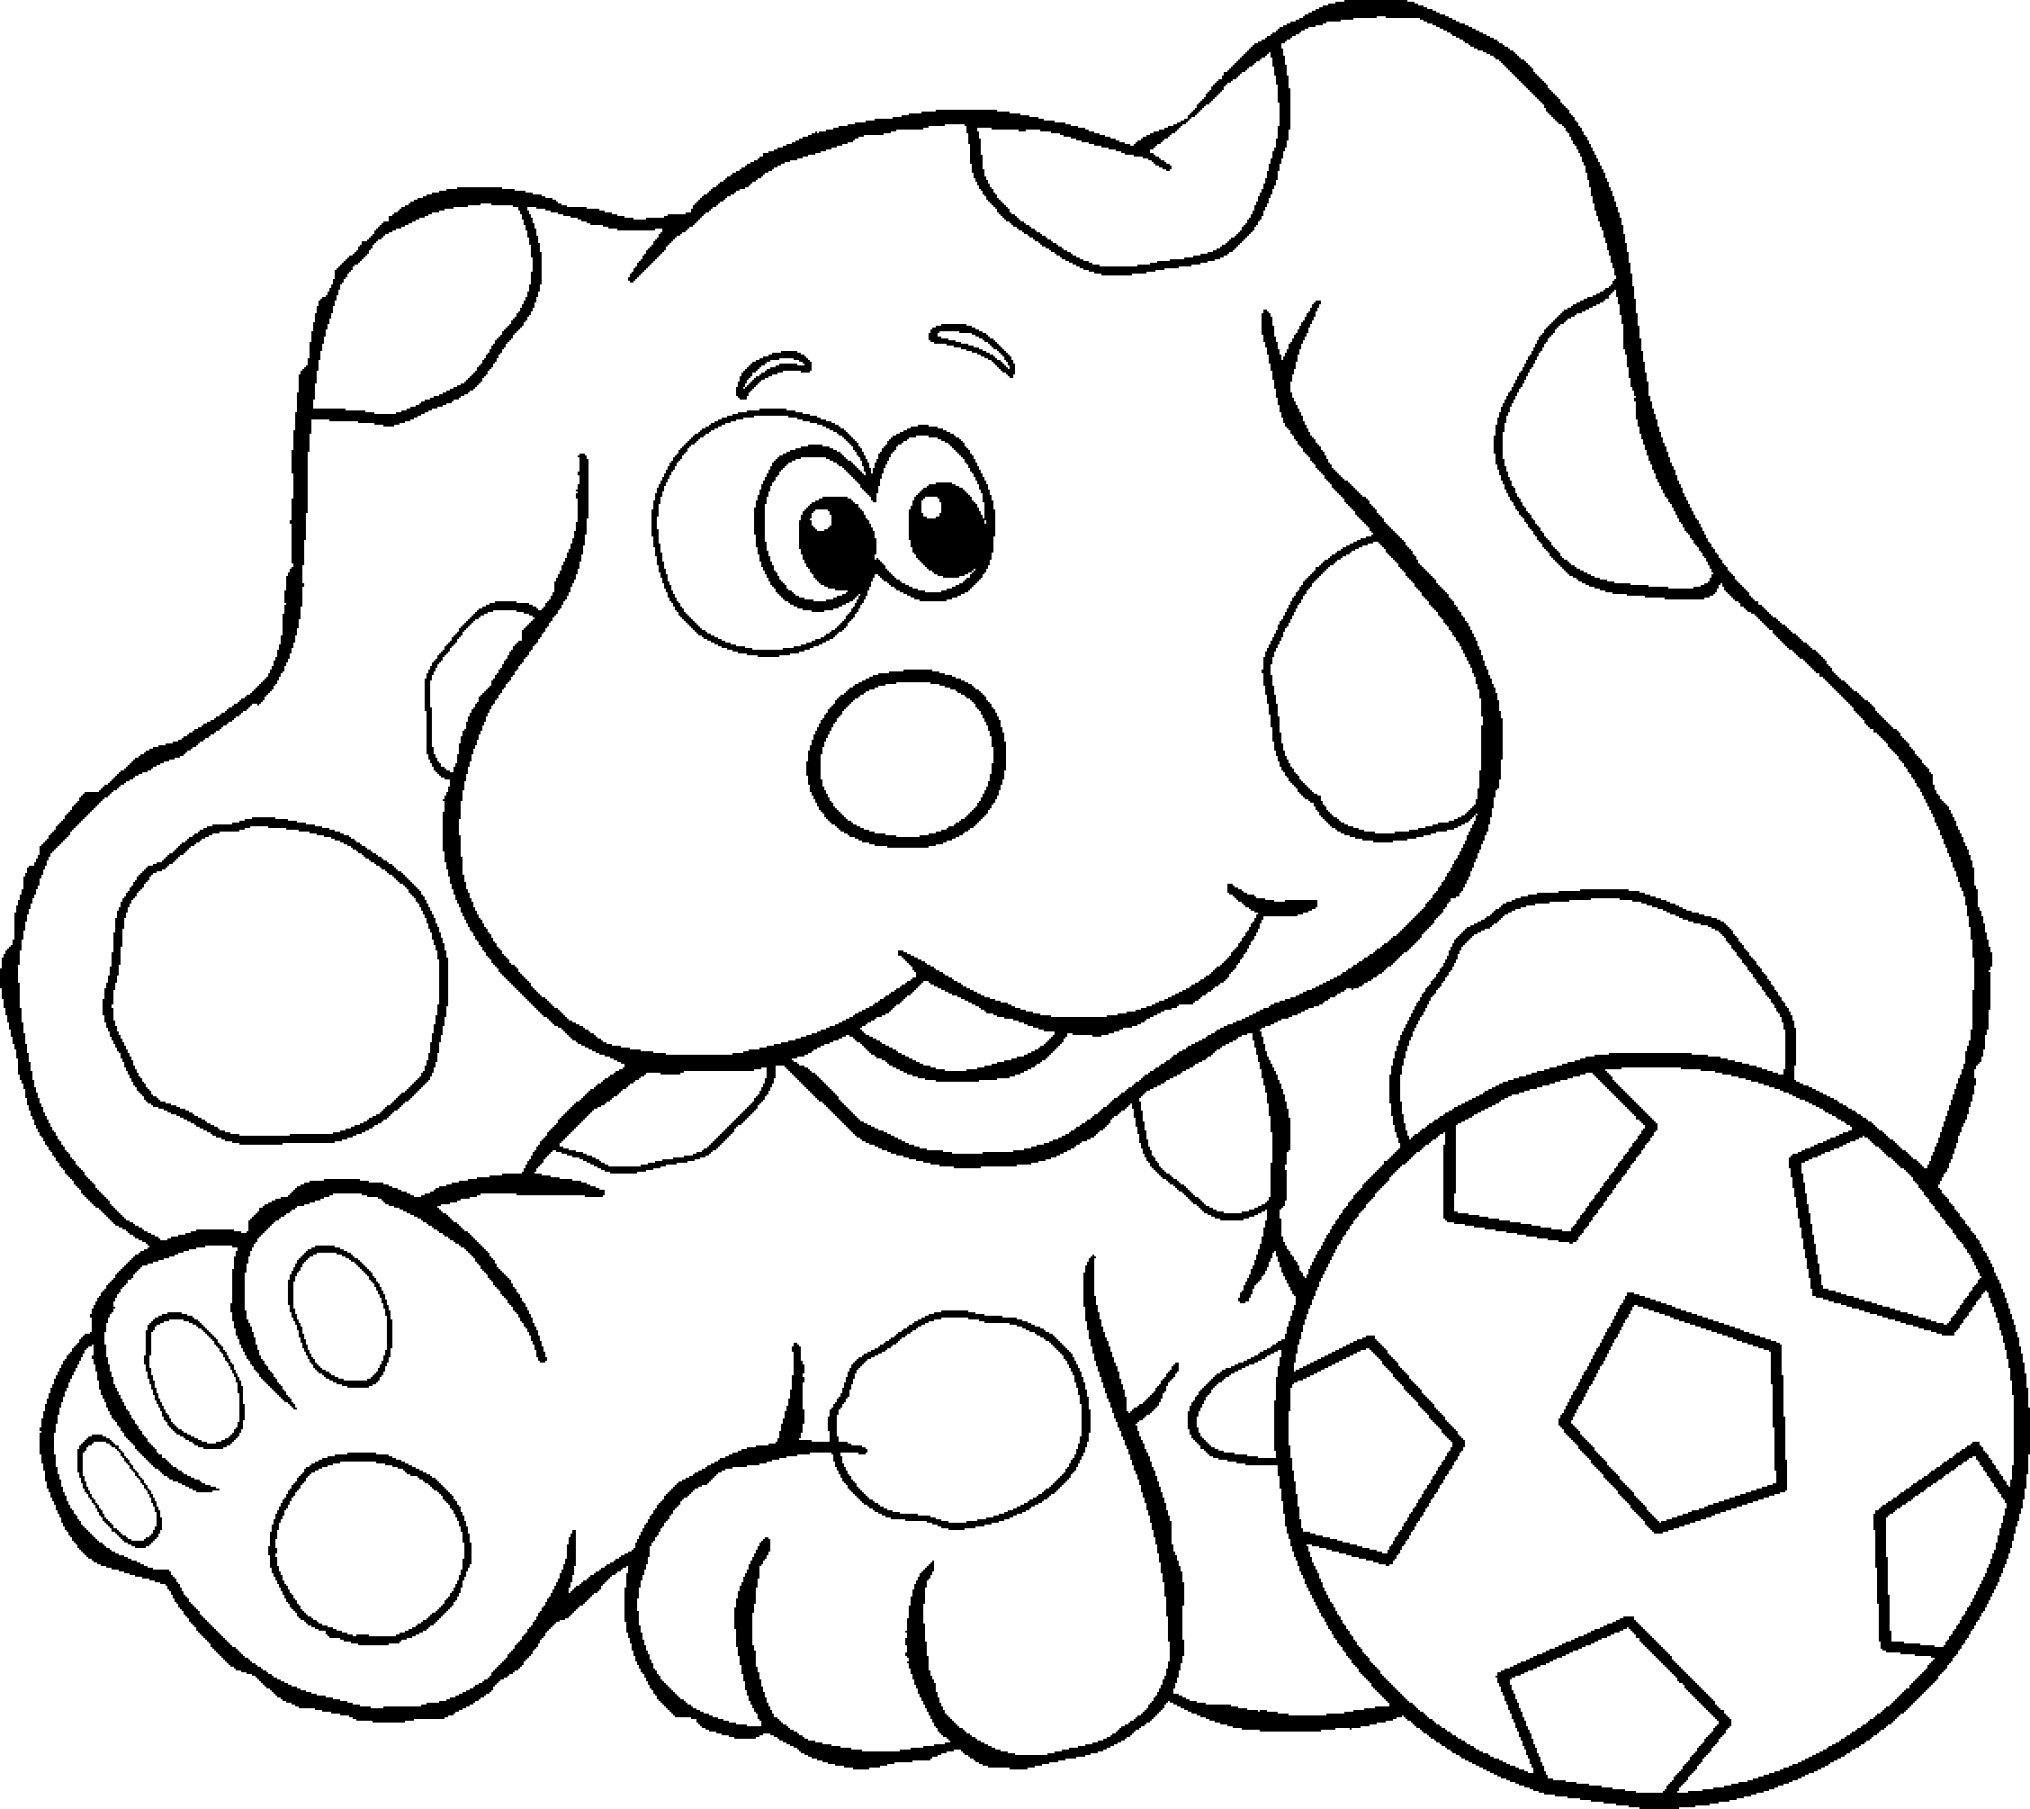 Dog Paw Coloring Page at GetColorings.com | Free printable colorings